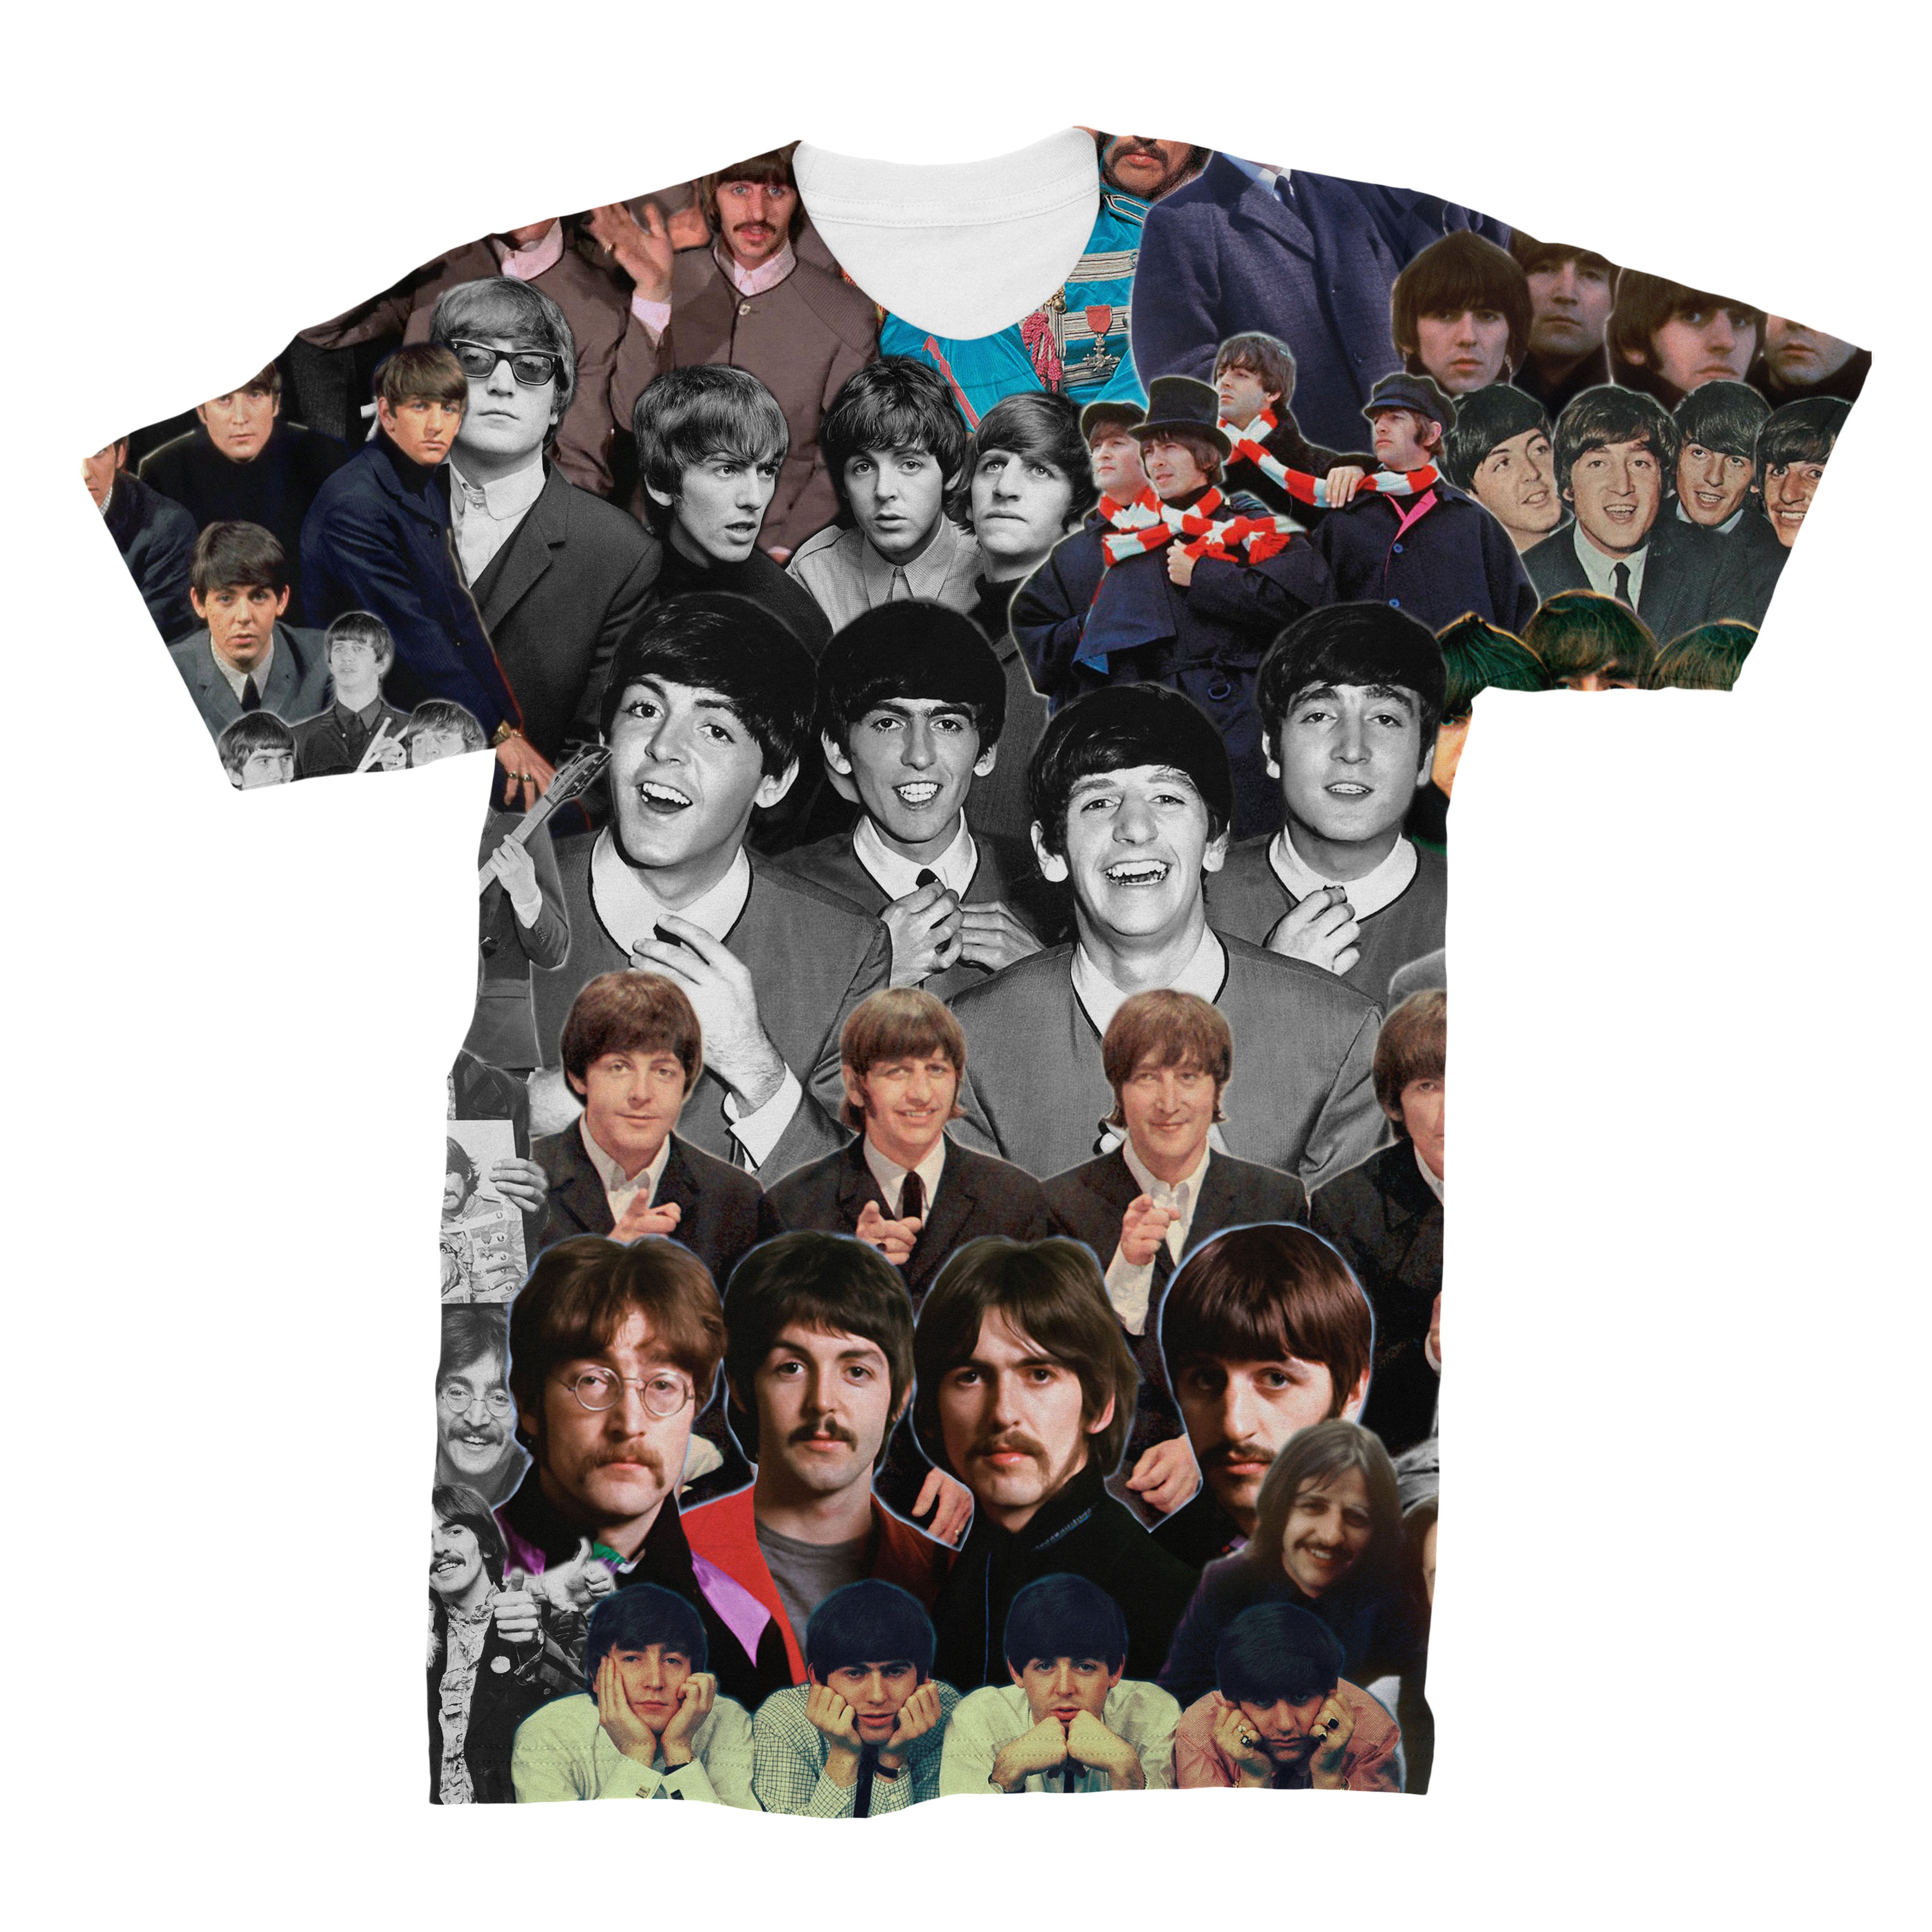 with the beatles t shirt